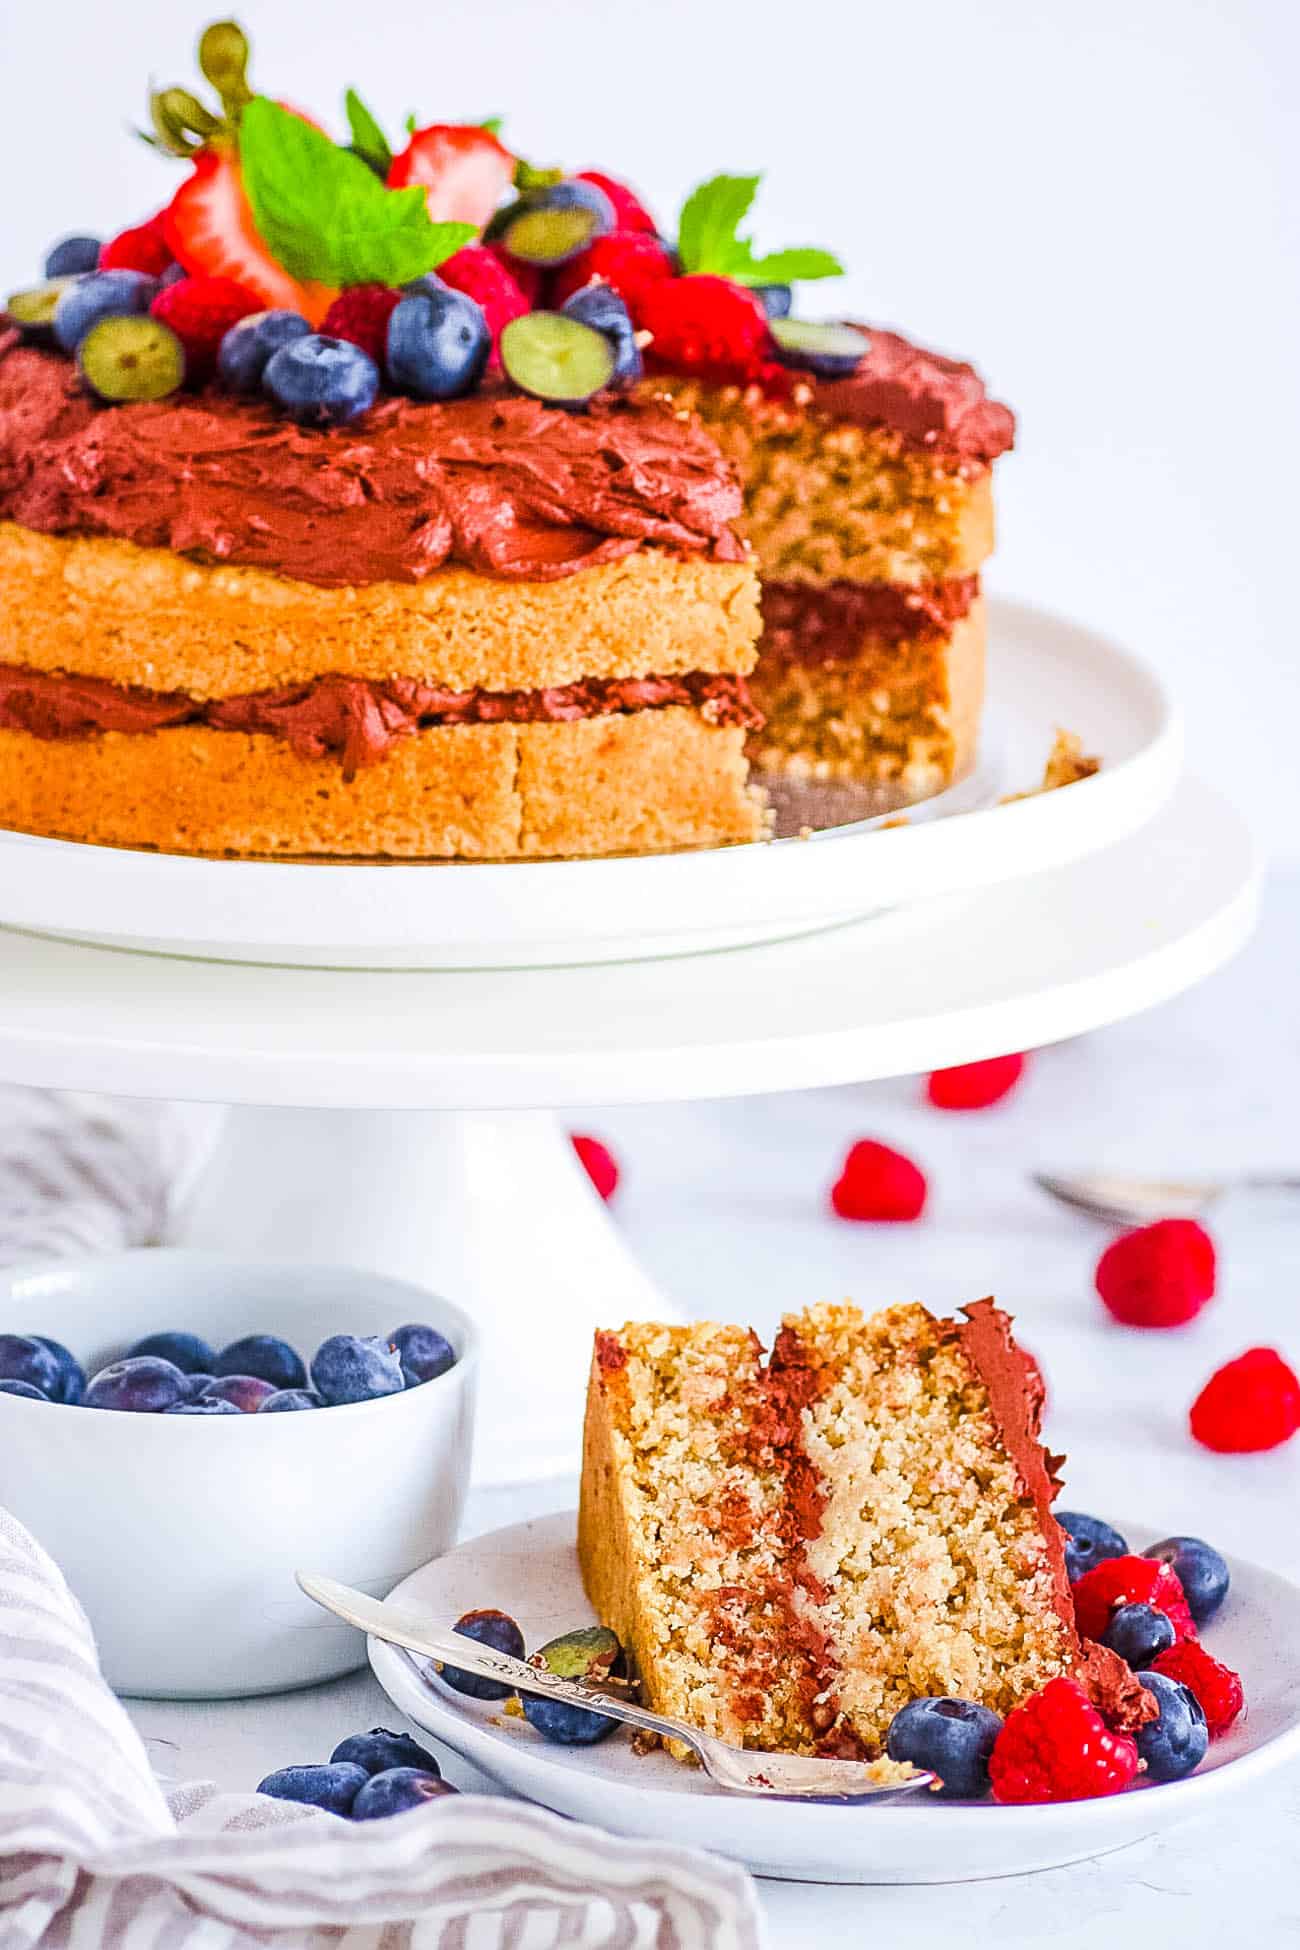 easy, healthy, gluten free, vegan oat flour cake recipe topped with fresh berries